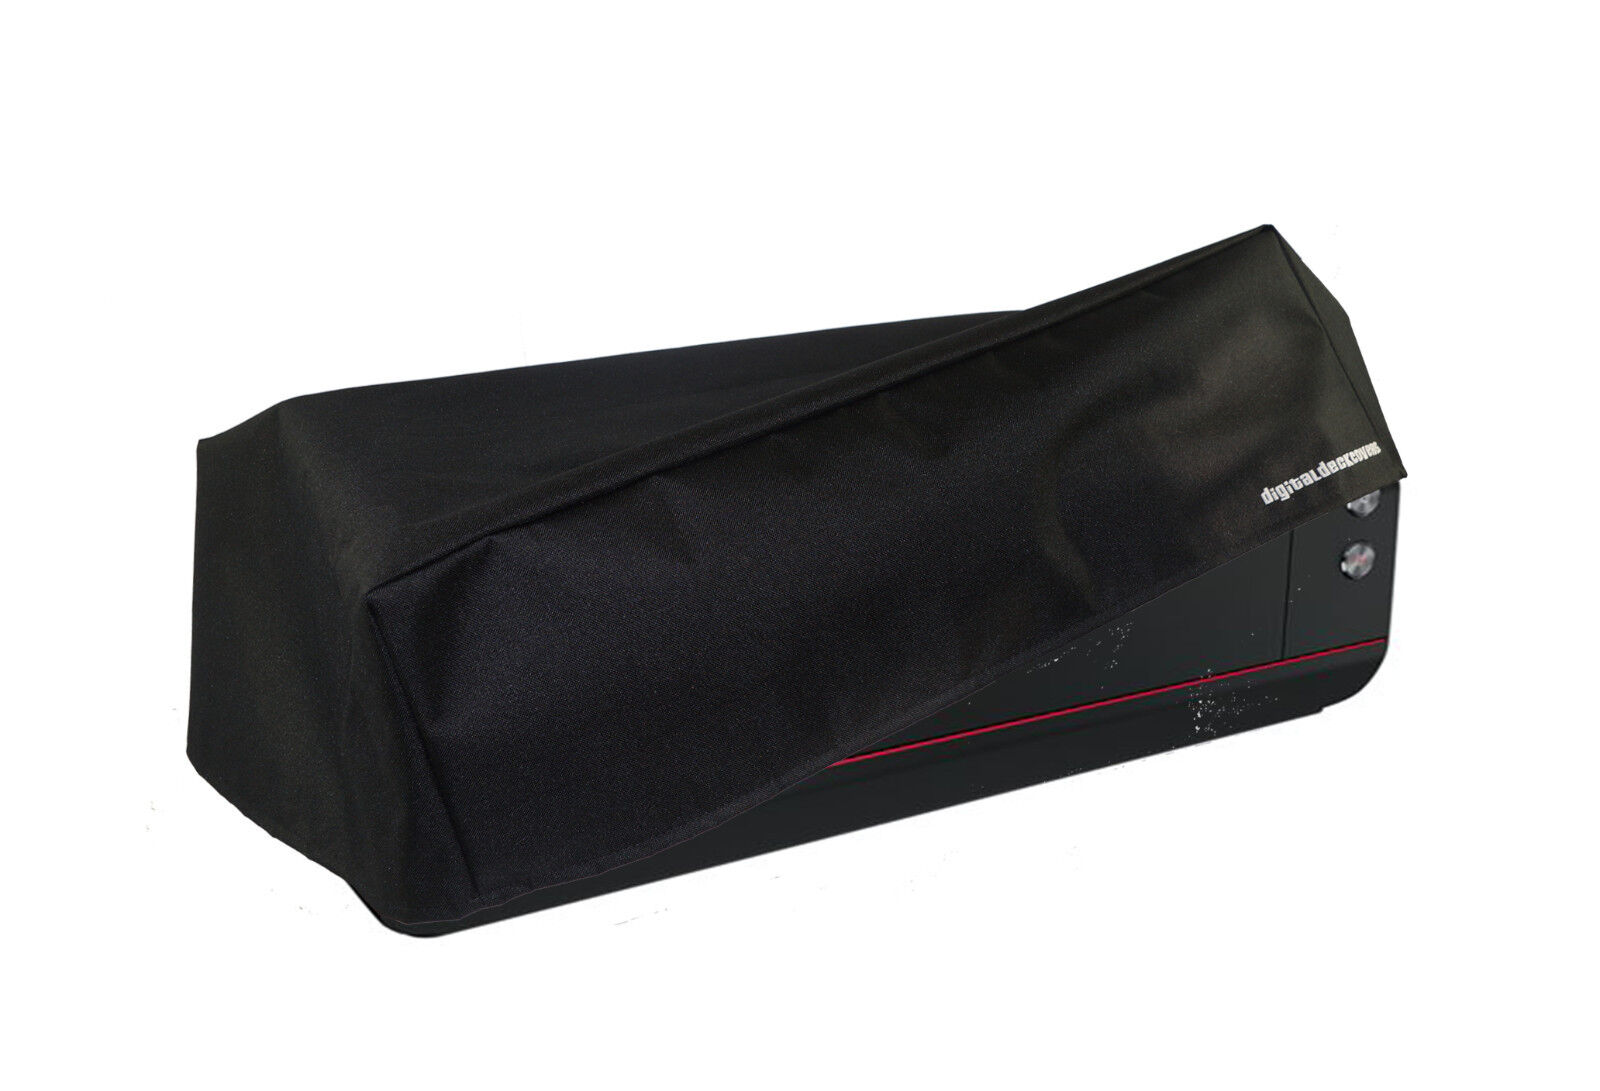 Printer Dust Cover for Canon imagePROGRAF PRO-1000 Printers Plotter Protector